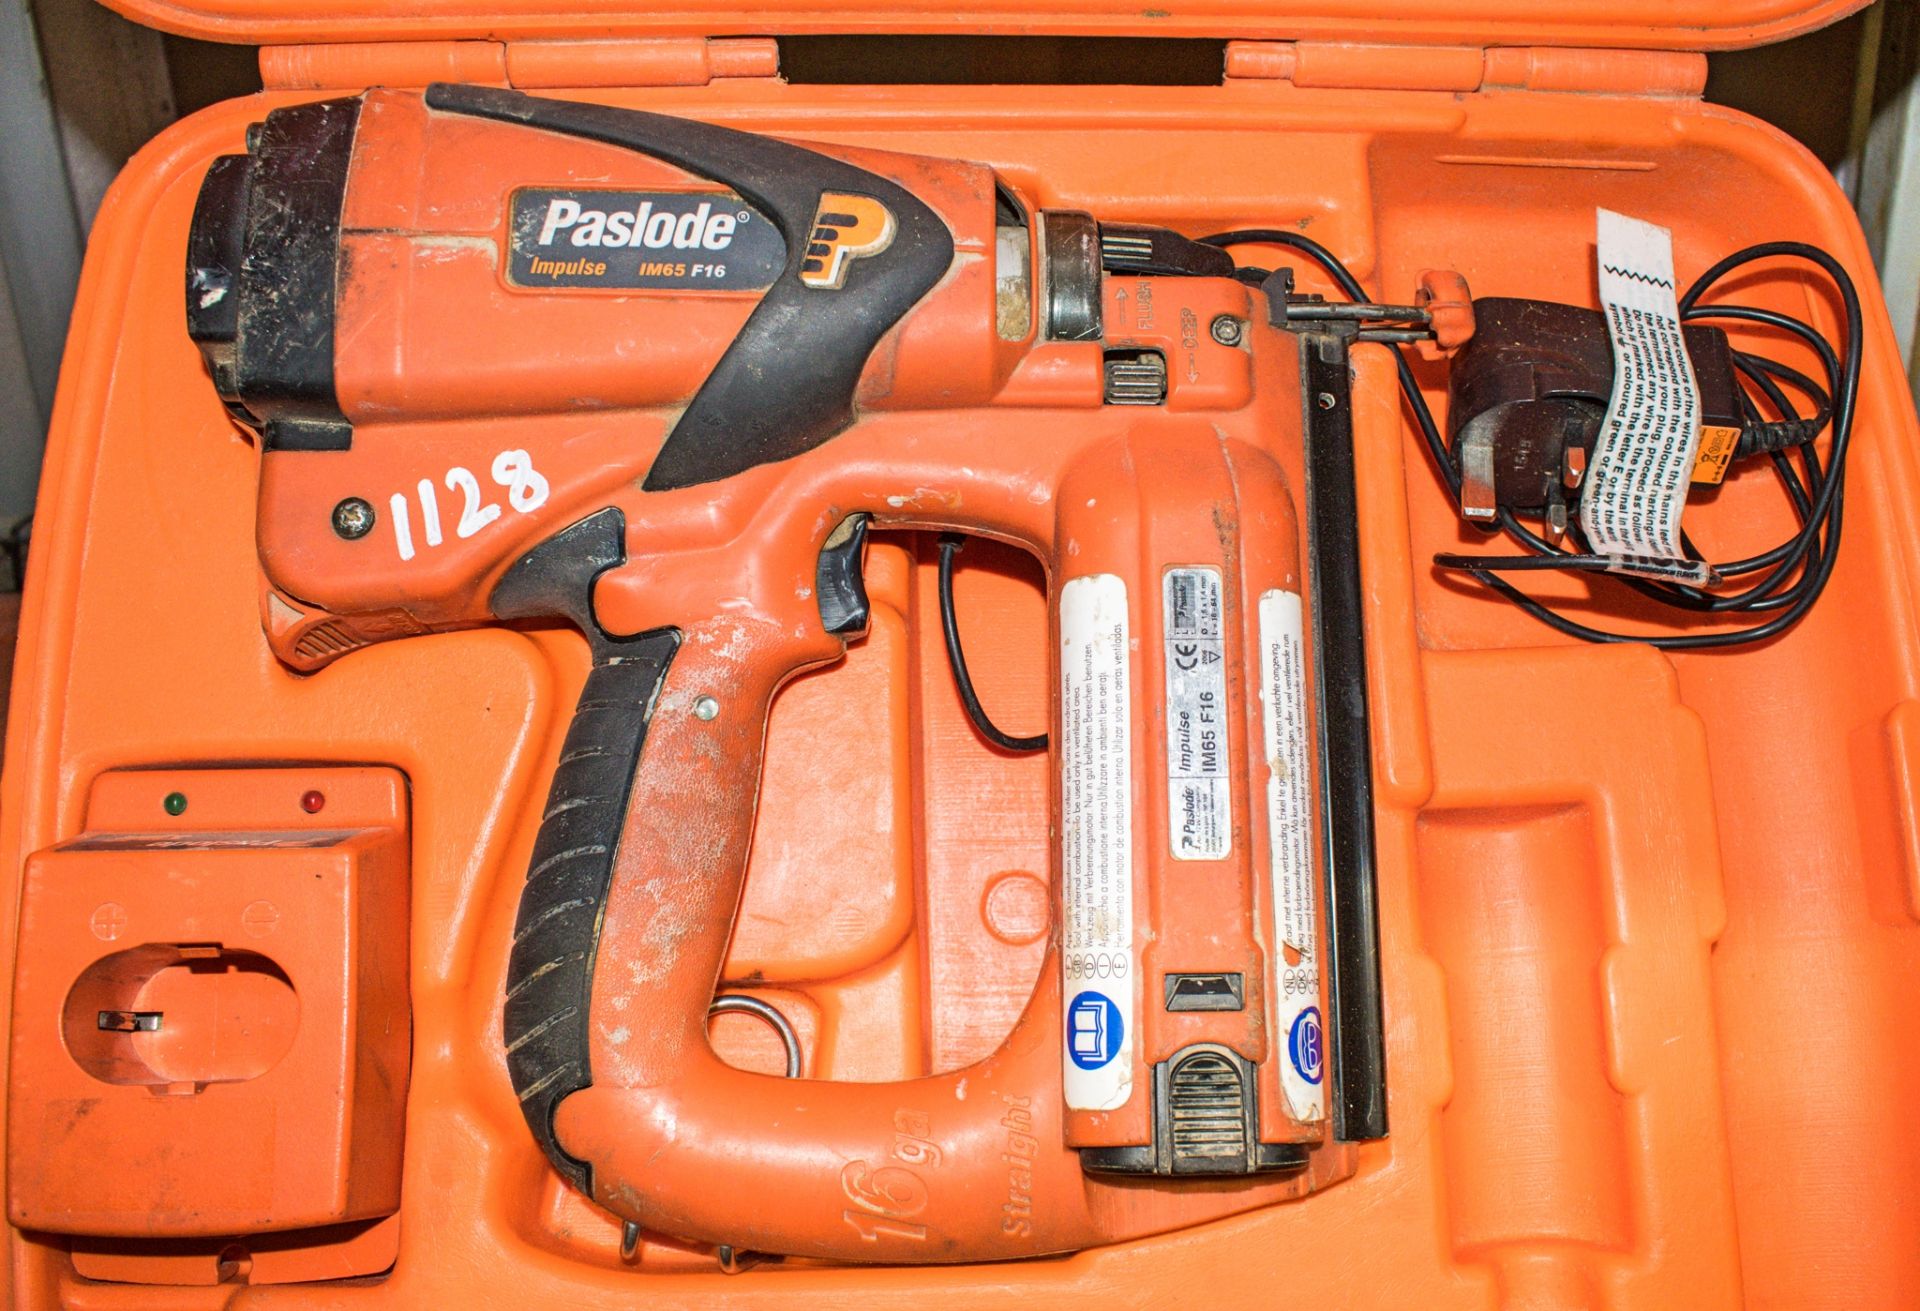 Paslode nail gun c/w battery, charger & carry case